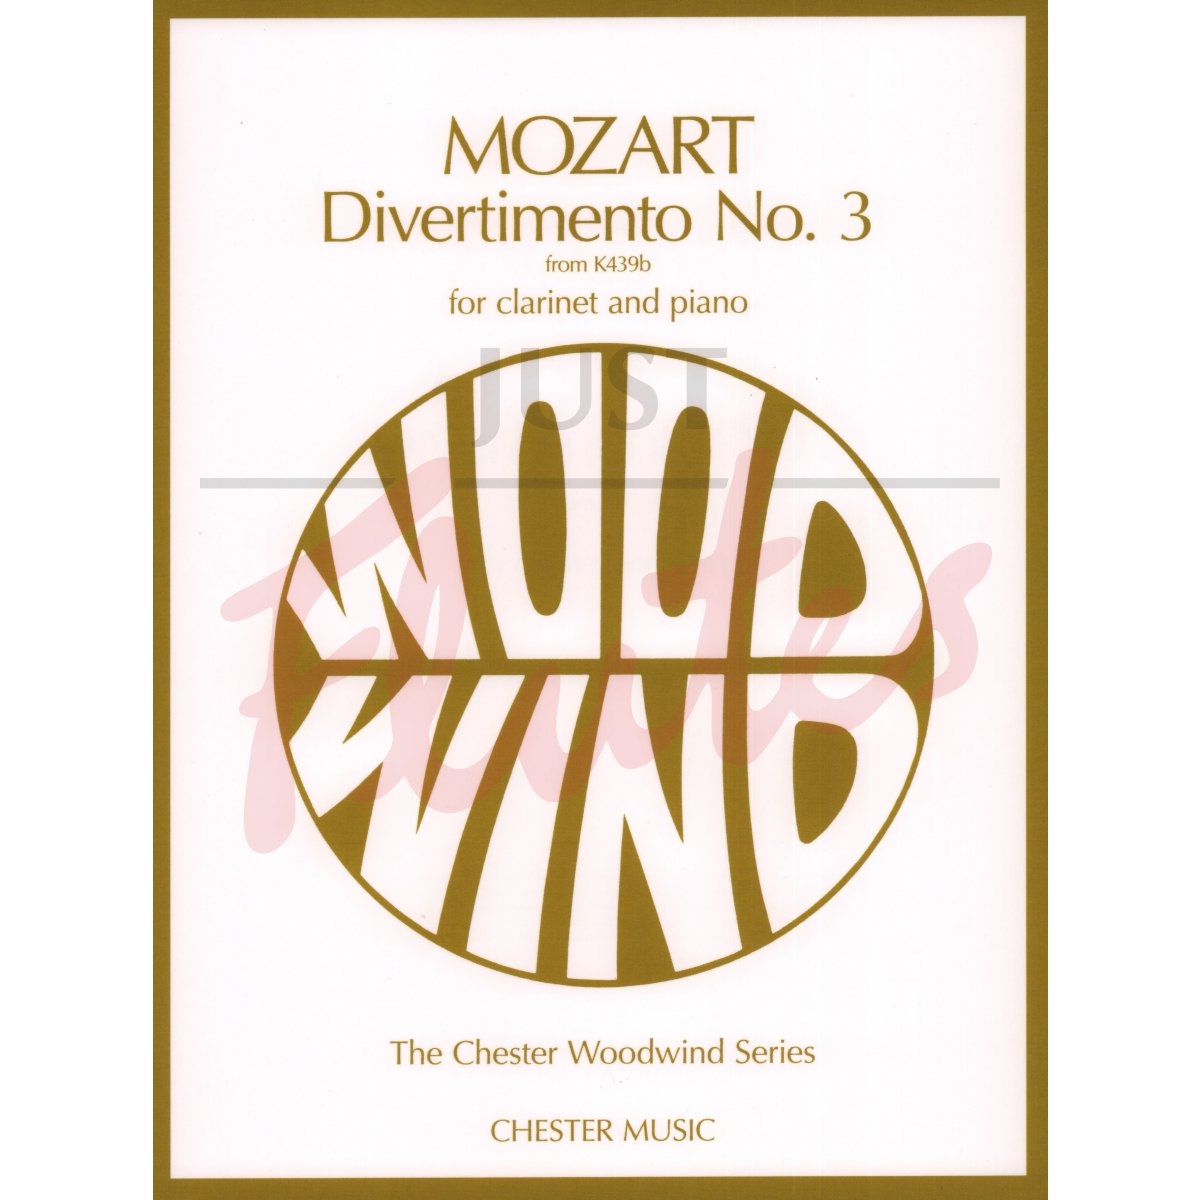 Divertimento No 3 for Clarinet and Piano